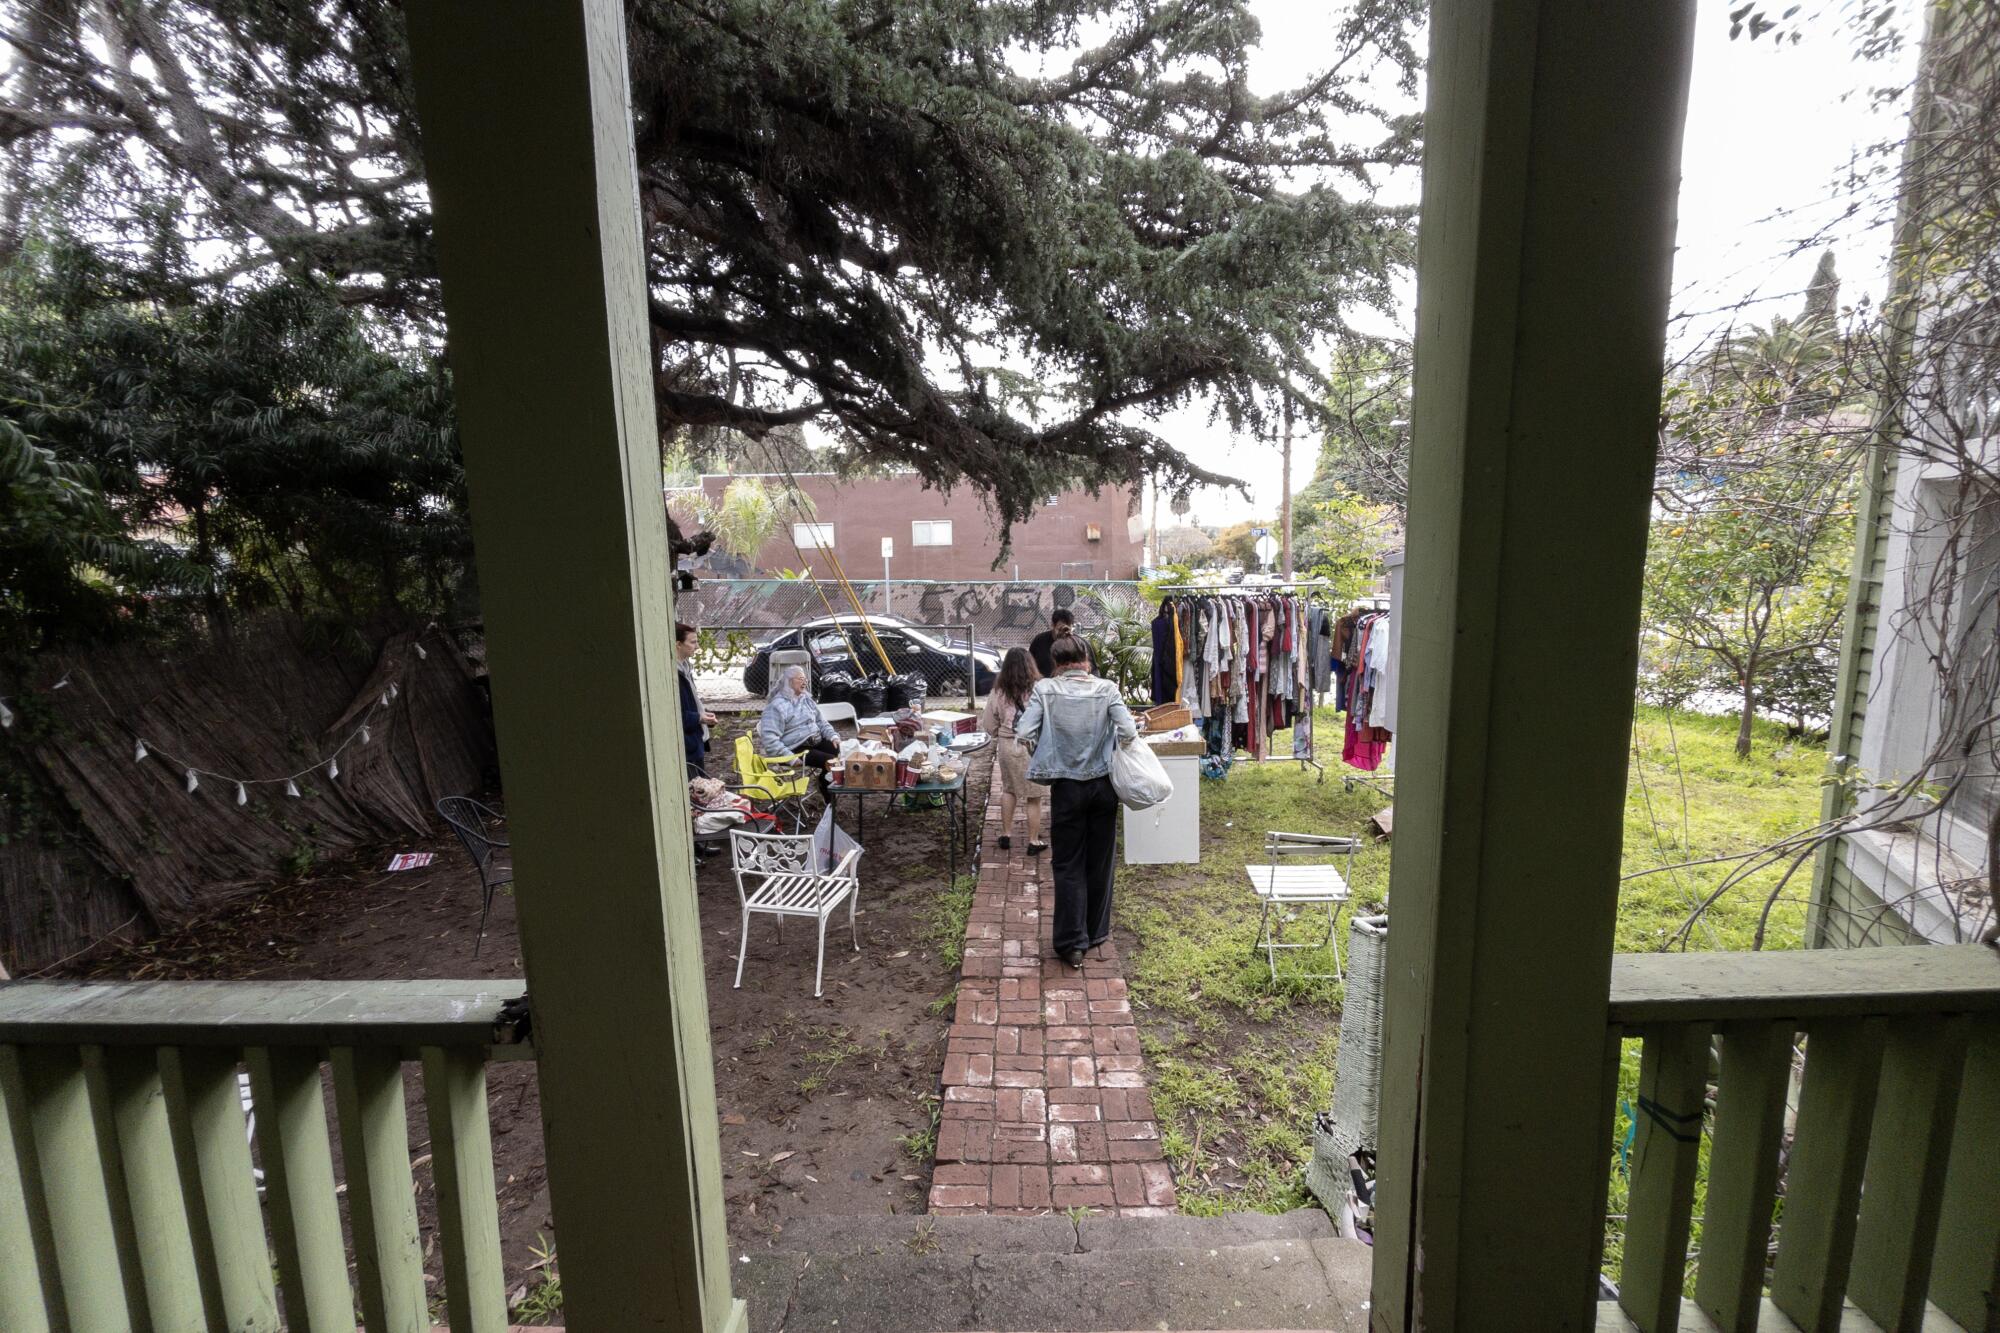 Lupe Breard holds a yard sale to help get rid of decades of belongings